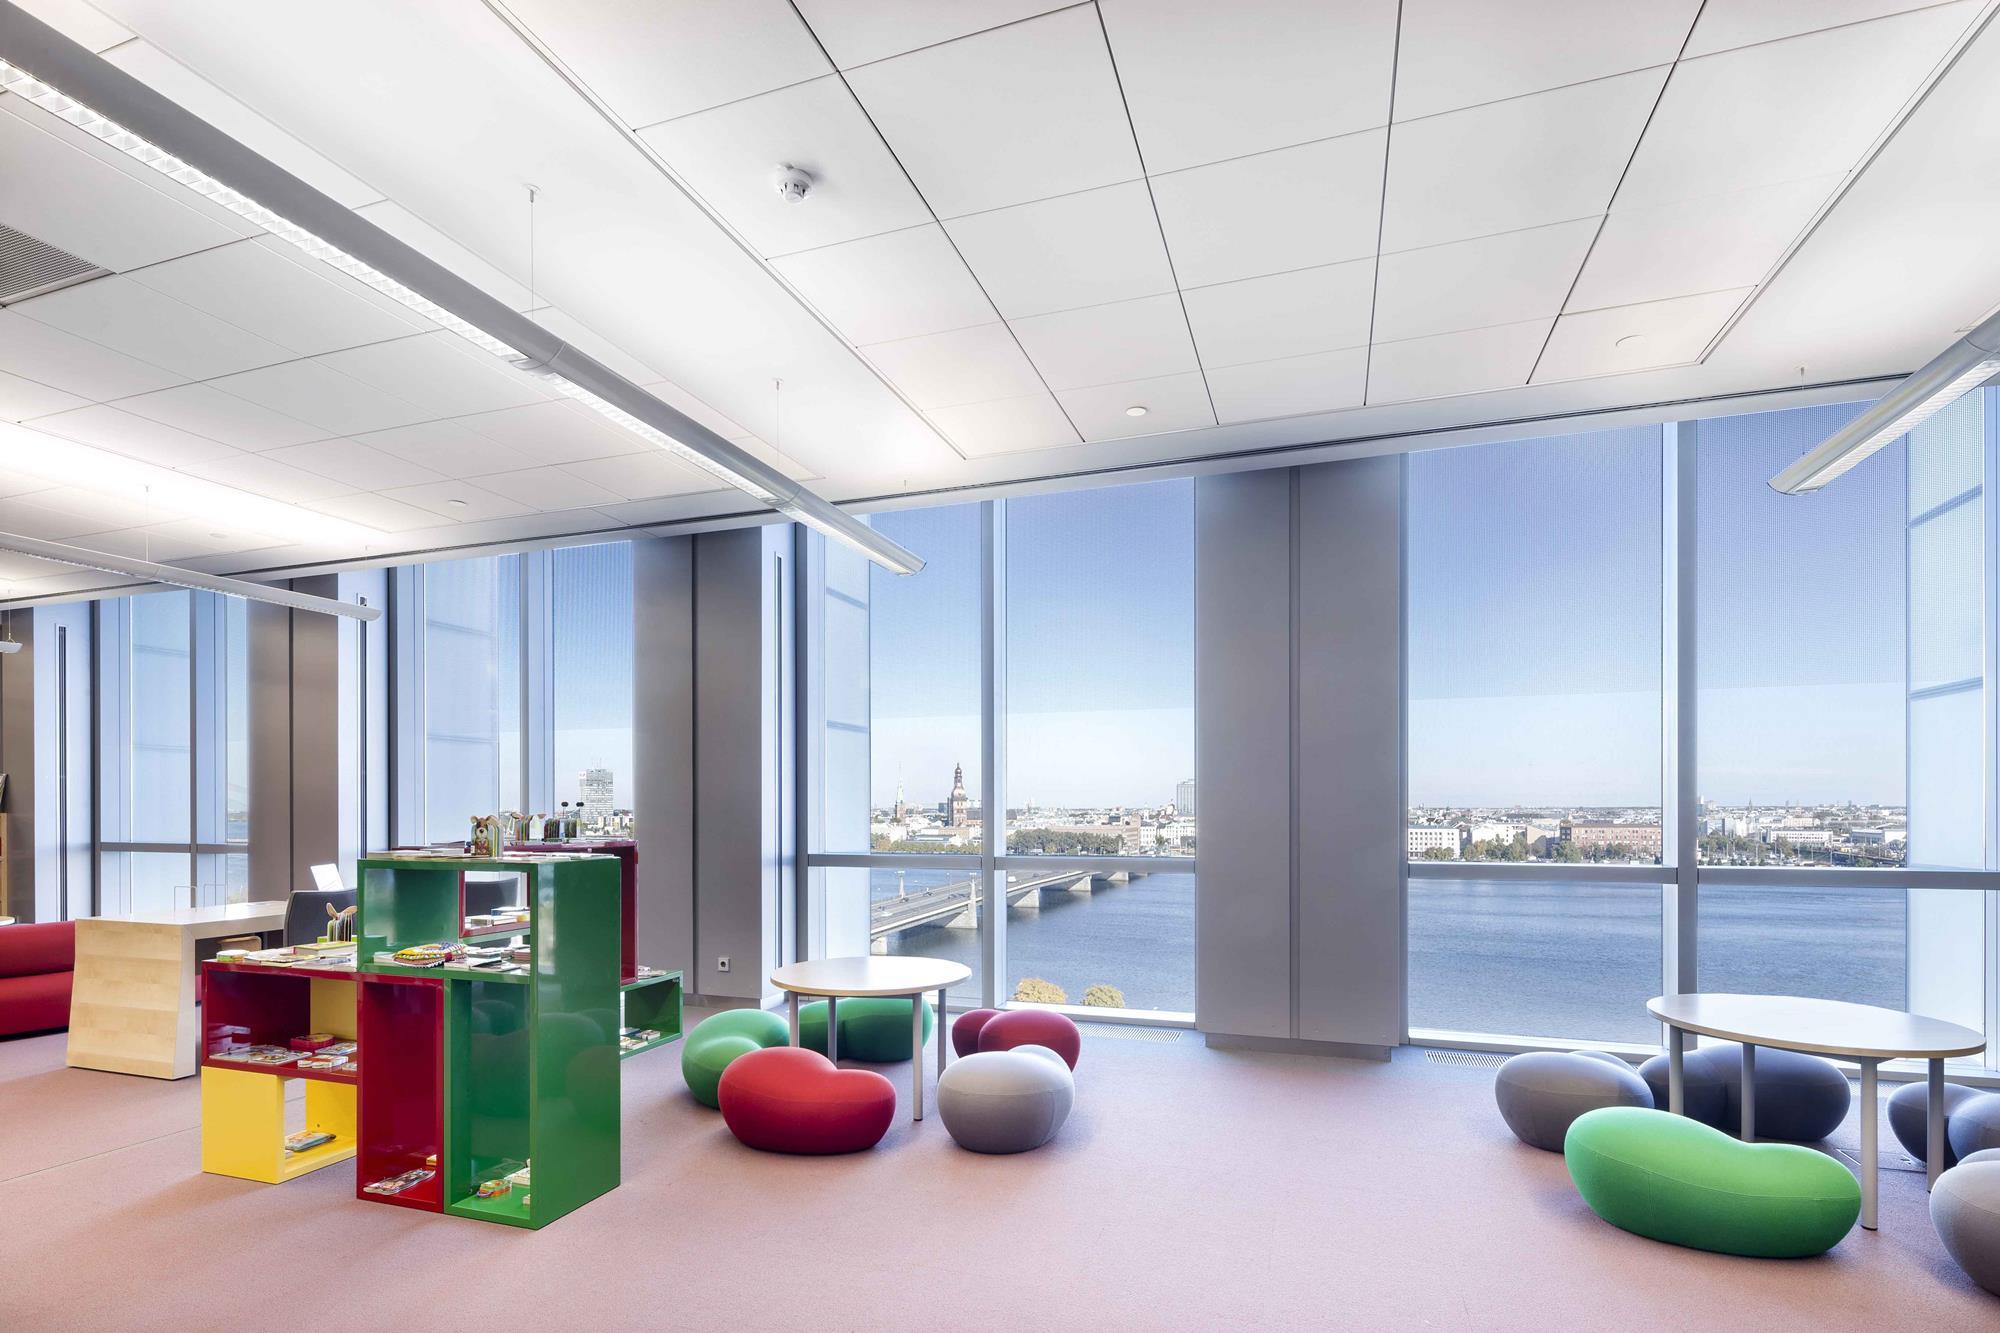 Cpd 7 2019 Specifying Suspended Ceilings For Health And Wellbeing